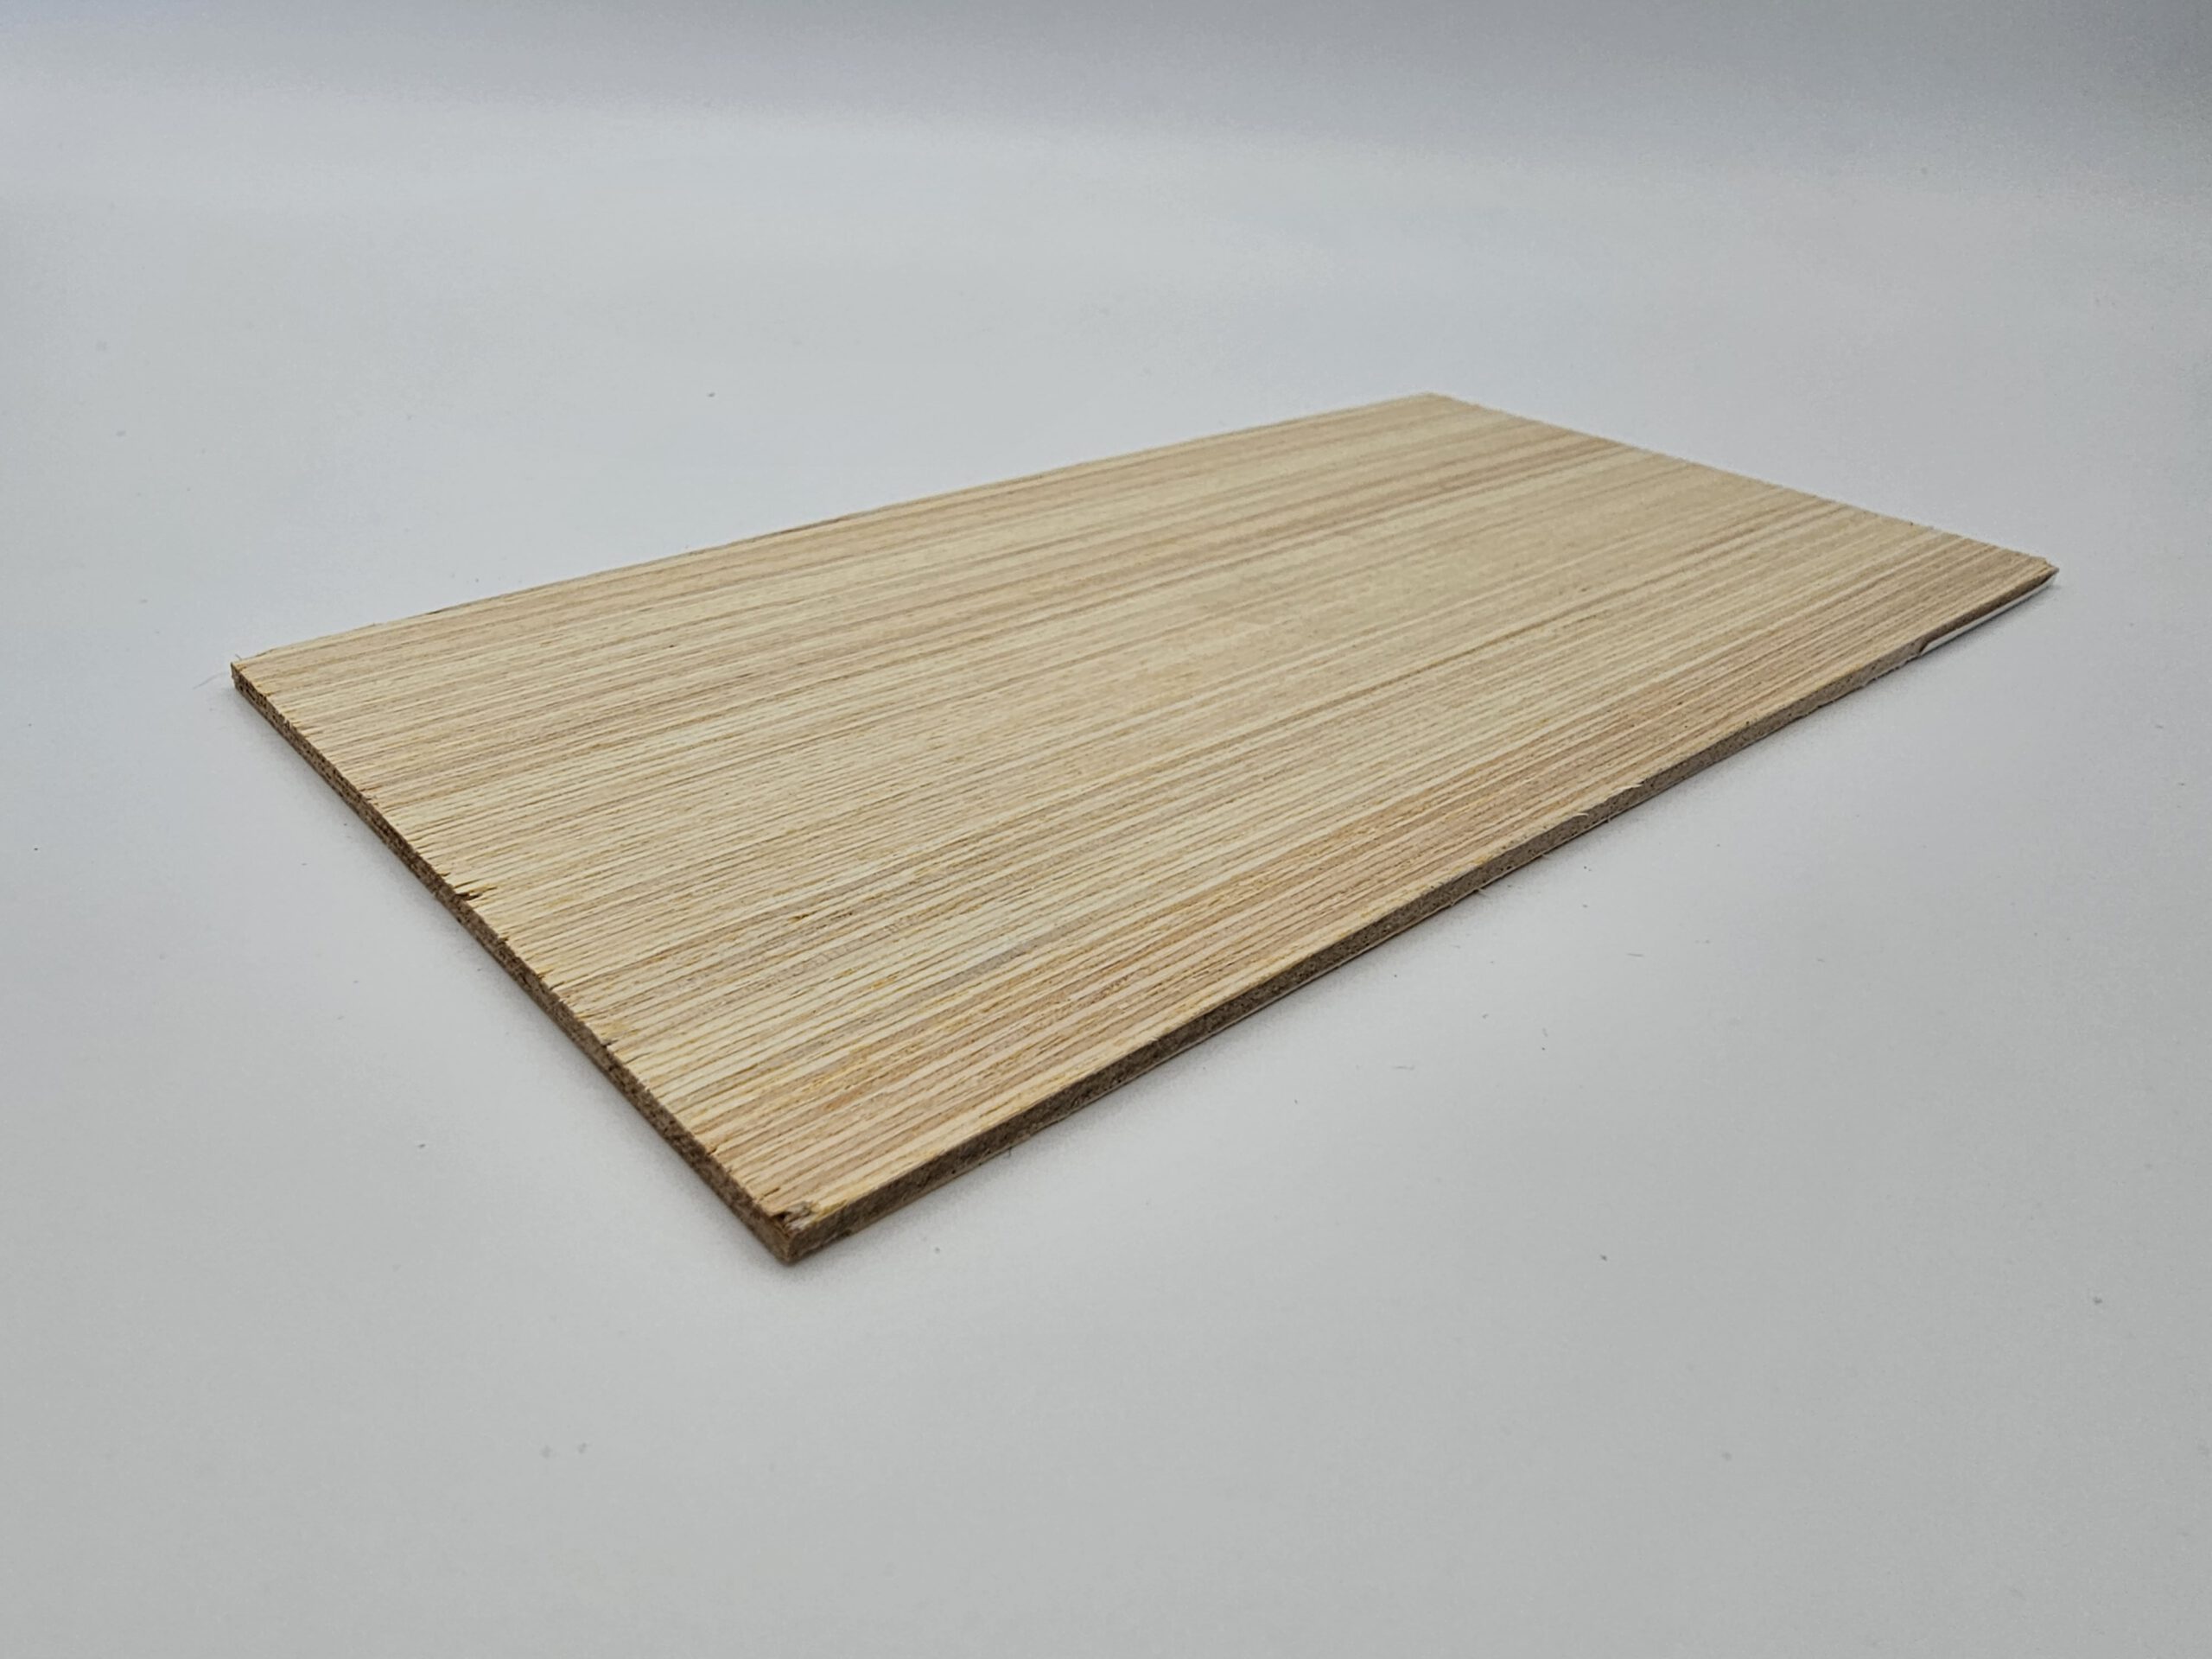 FaMPLY OVL grade Plywood